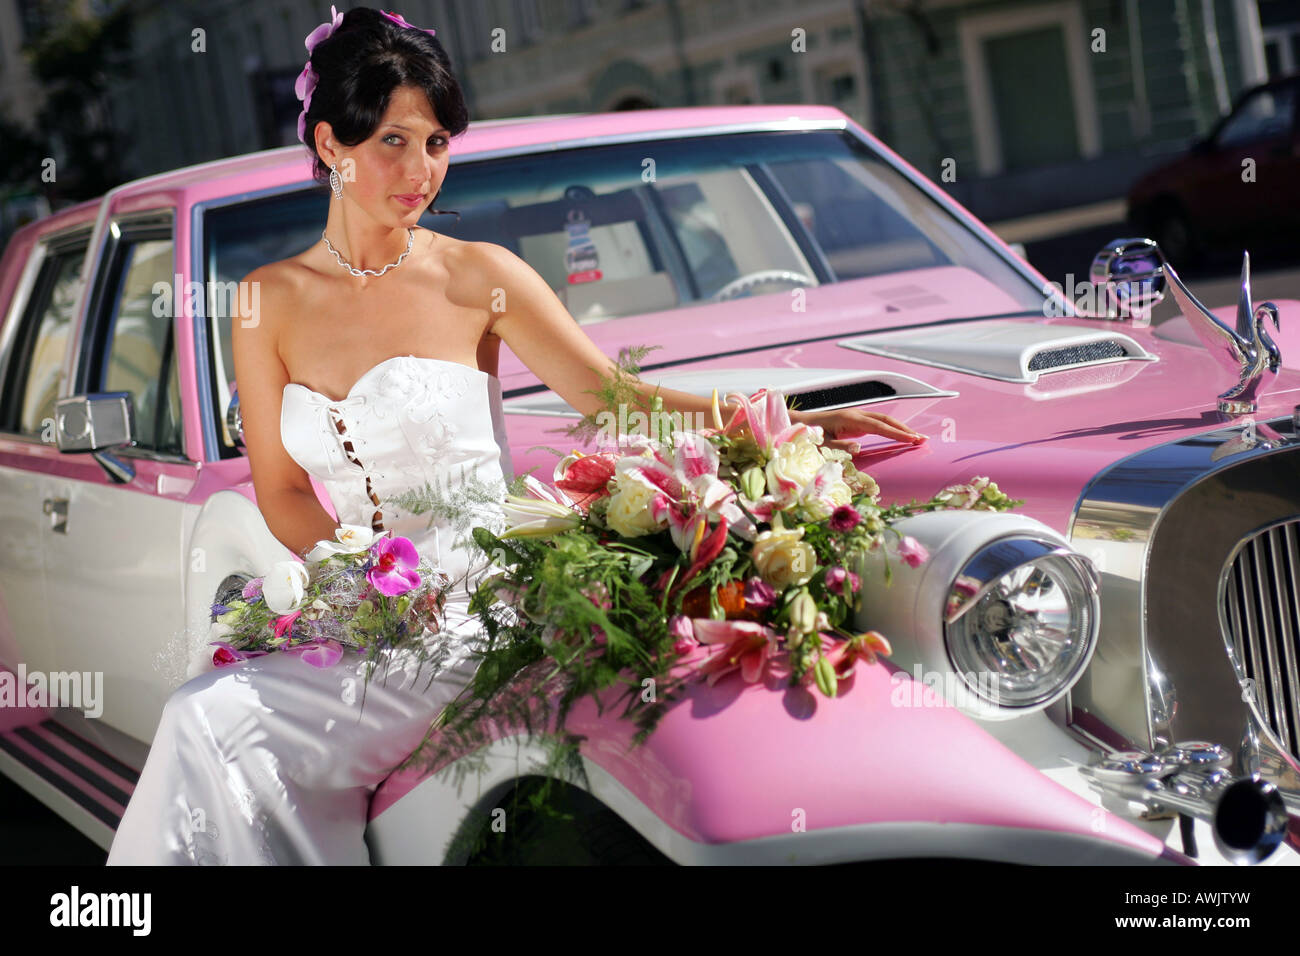 Beautiful smiling bride in white dress on wedding day. She is sat on the hood on a pink cadillac limousine wedding car Stock Photo